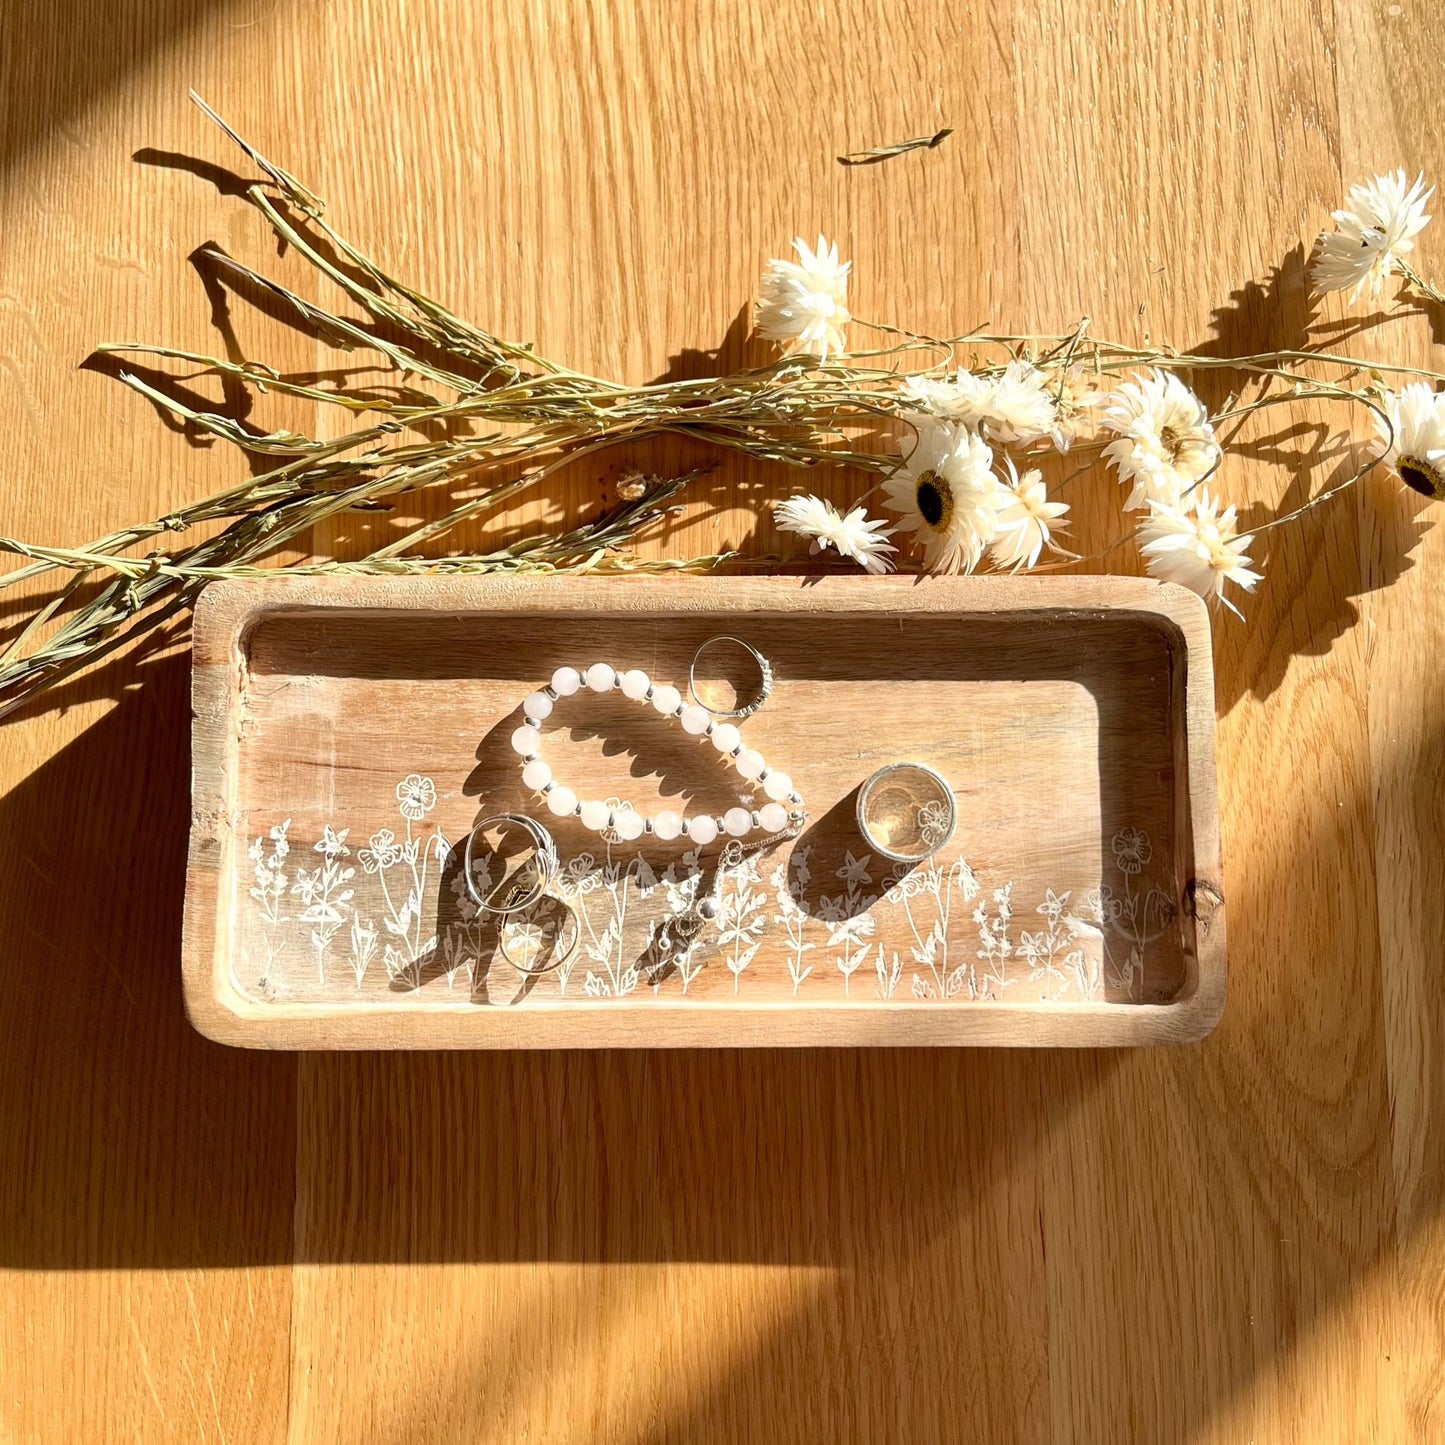 Showing Use of Small Wooden Tray As A Jewellery Tray